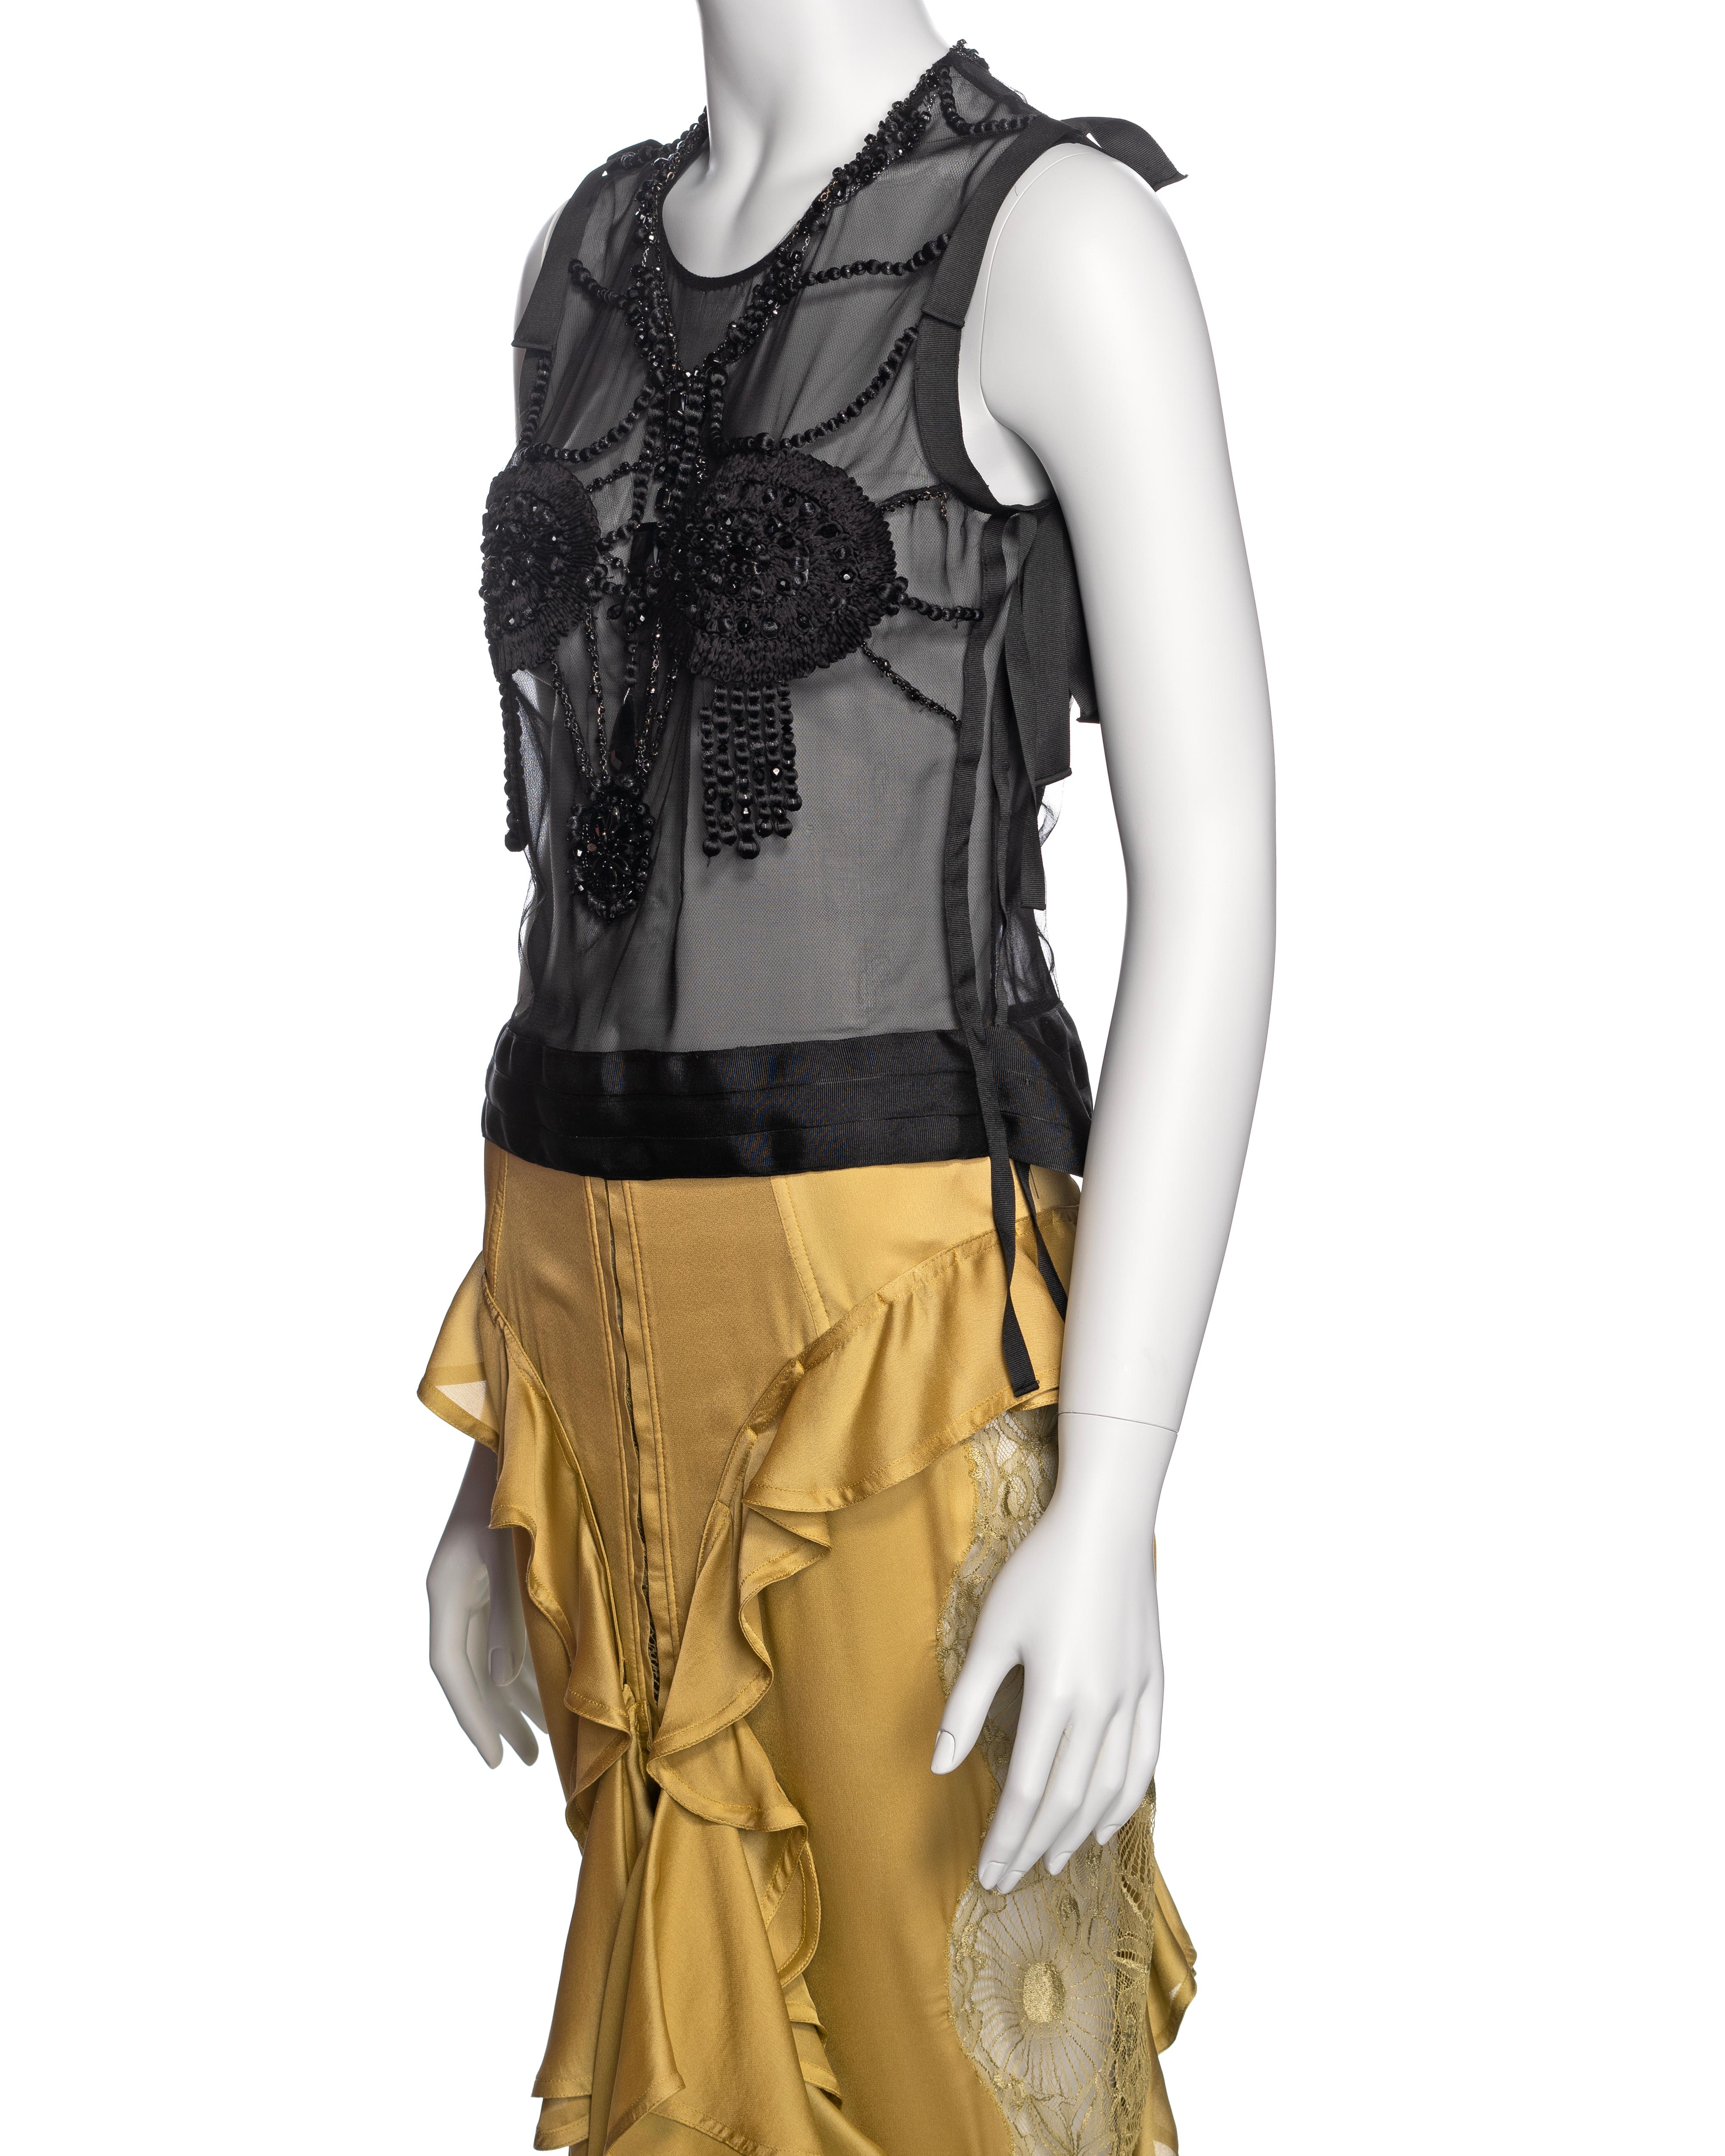 Yves Saint Laurent by Tom Ford Embellished Top and Silk Skirt Ensemble, FW 2003 11